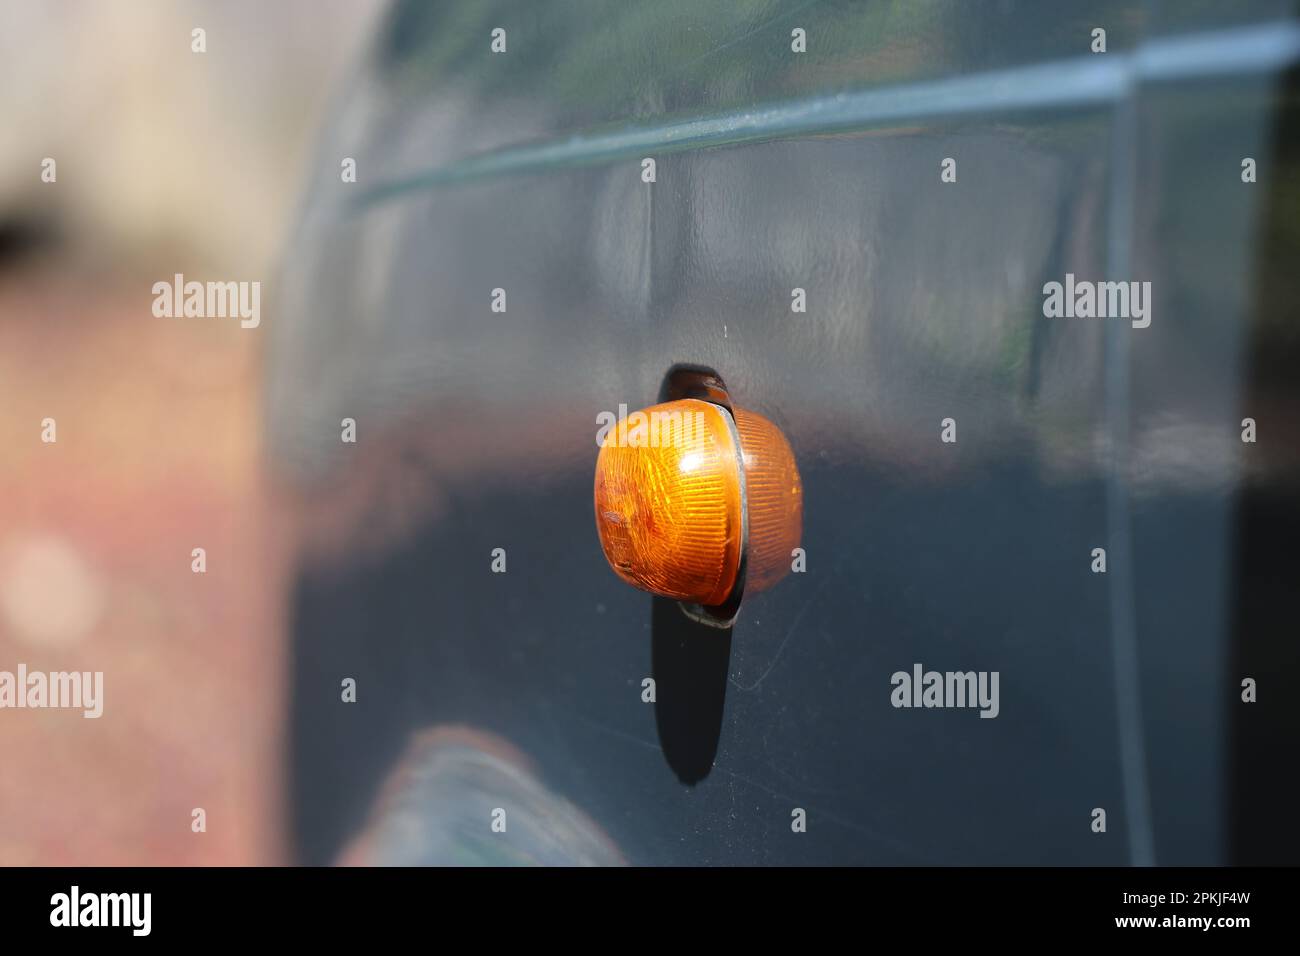 Turn signal lights or side indicator of an old car Stock Photo